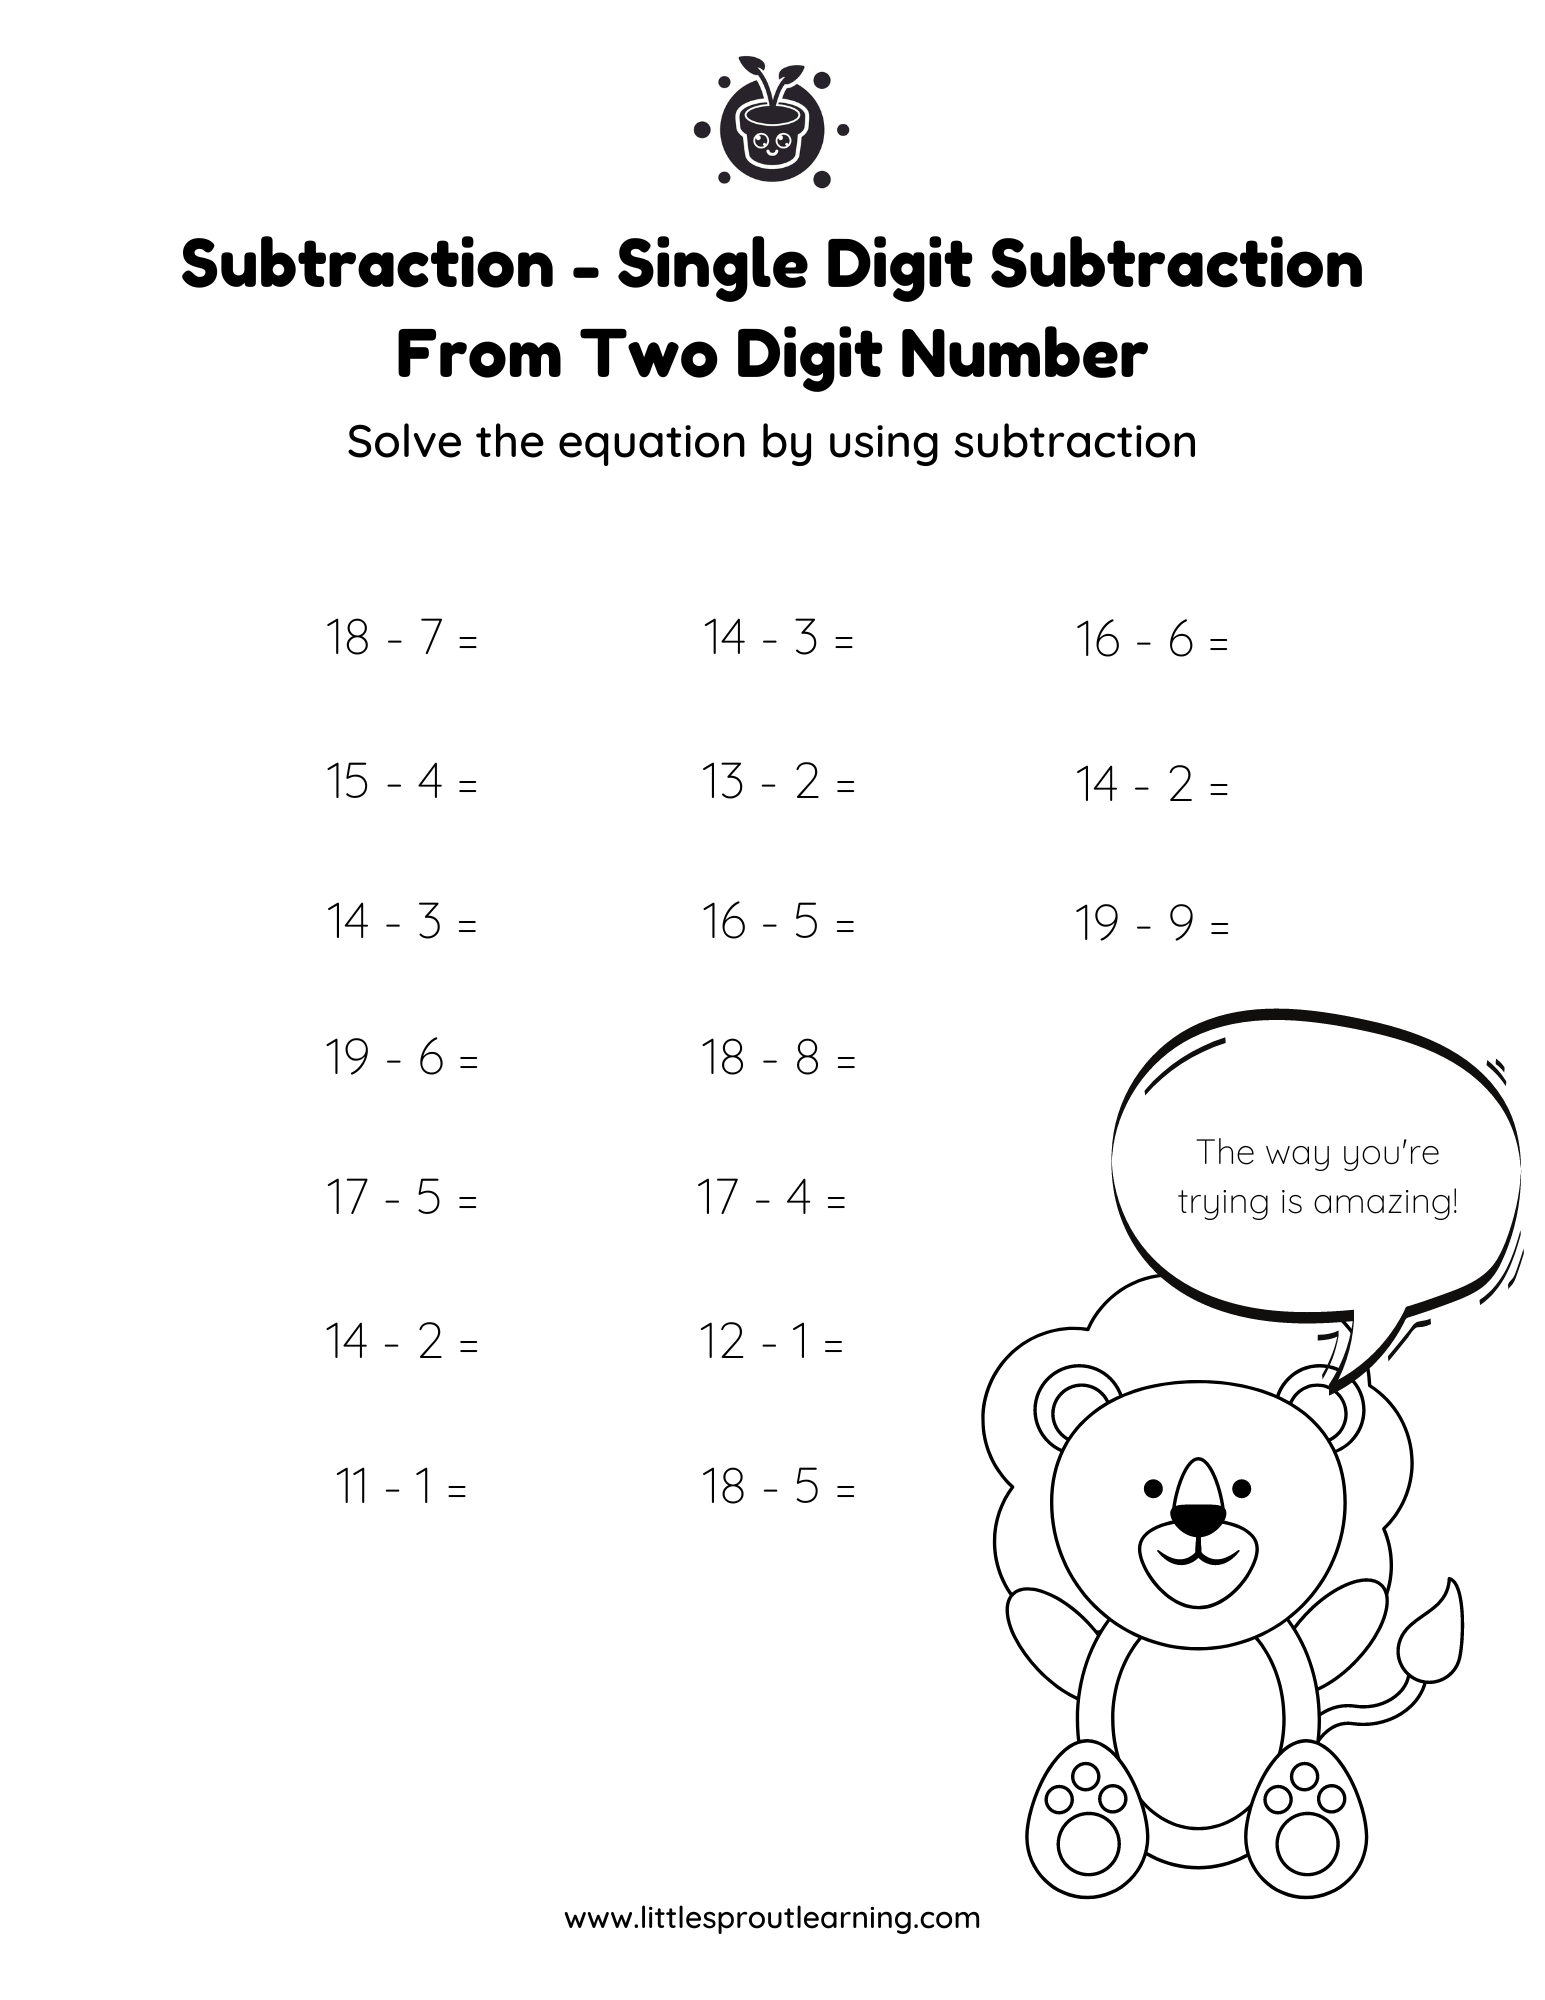 Subtraction Worksheet – Subtract Single Digits from Two Digits